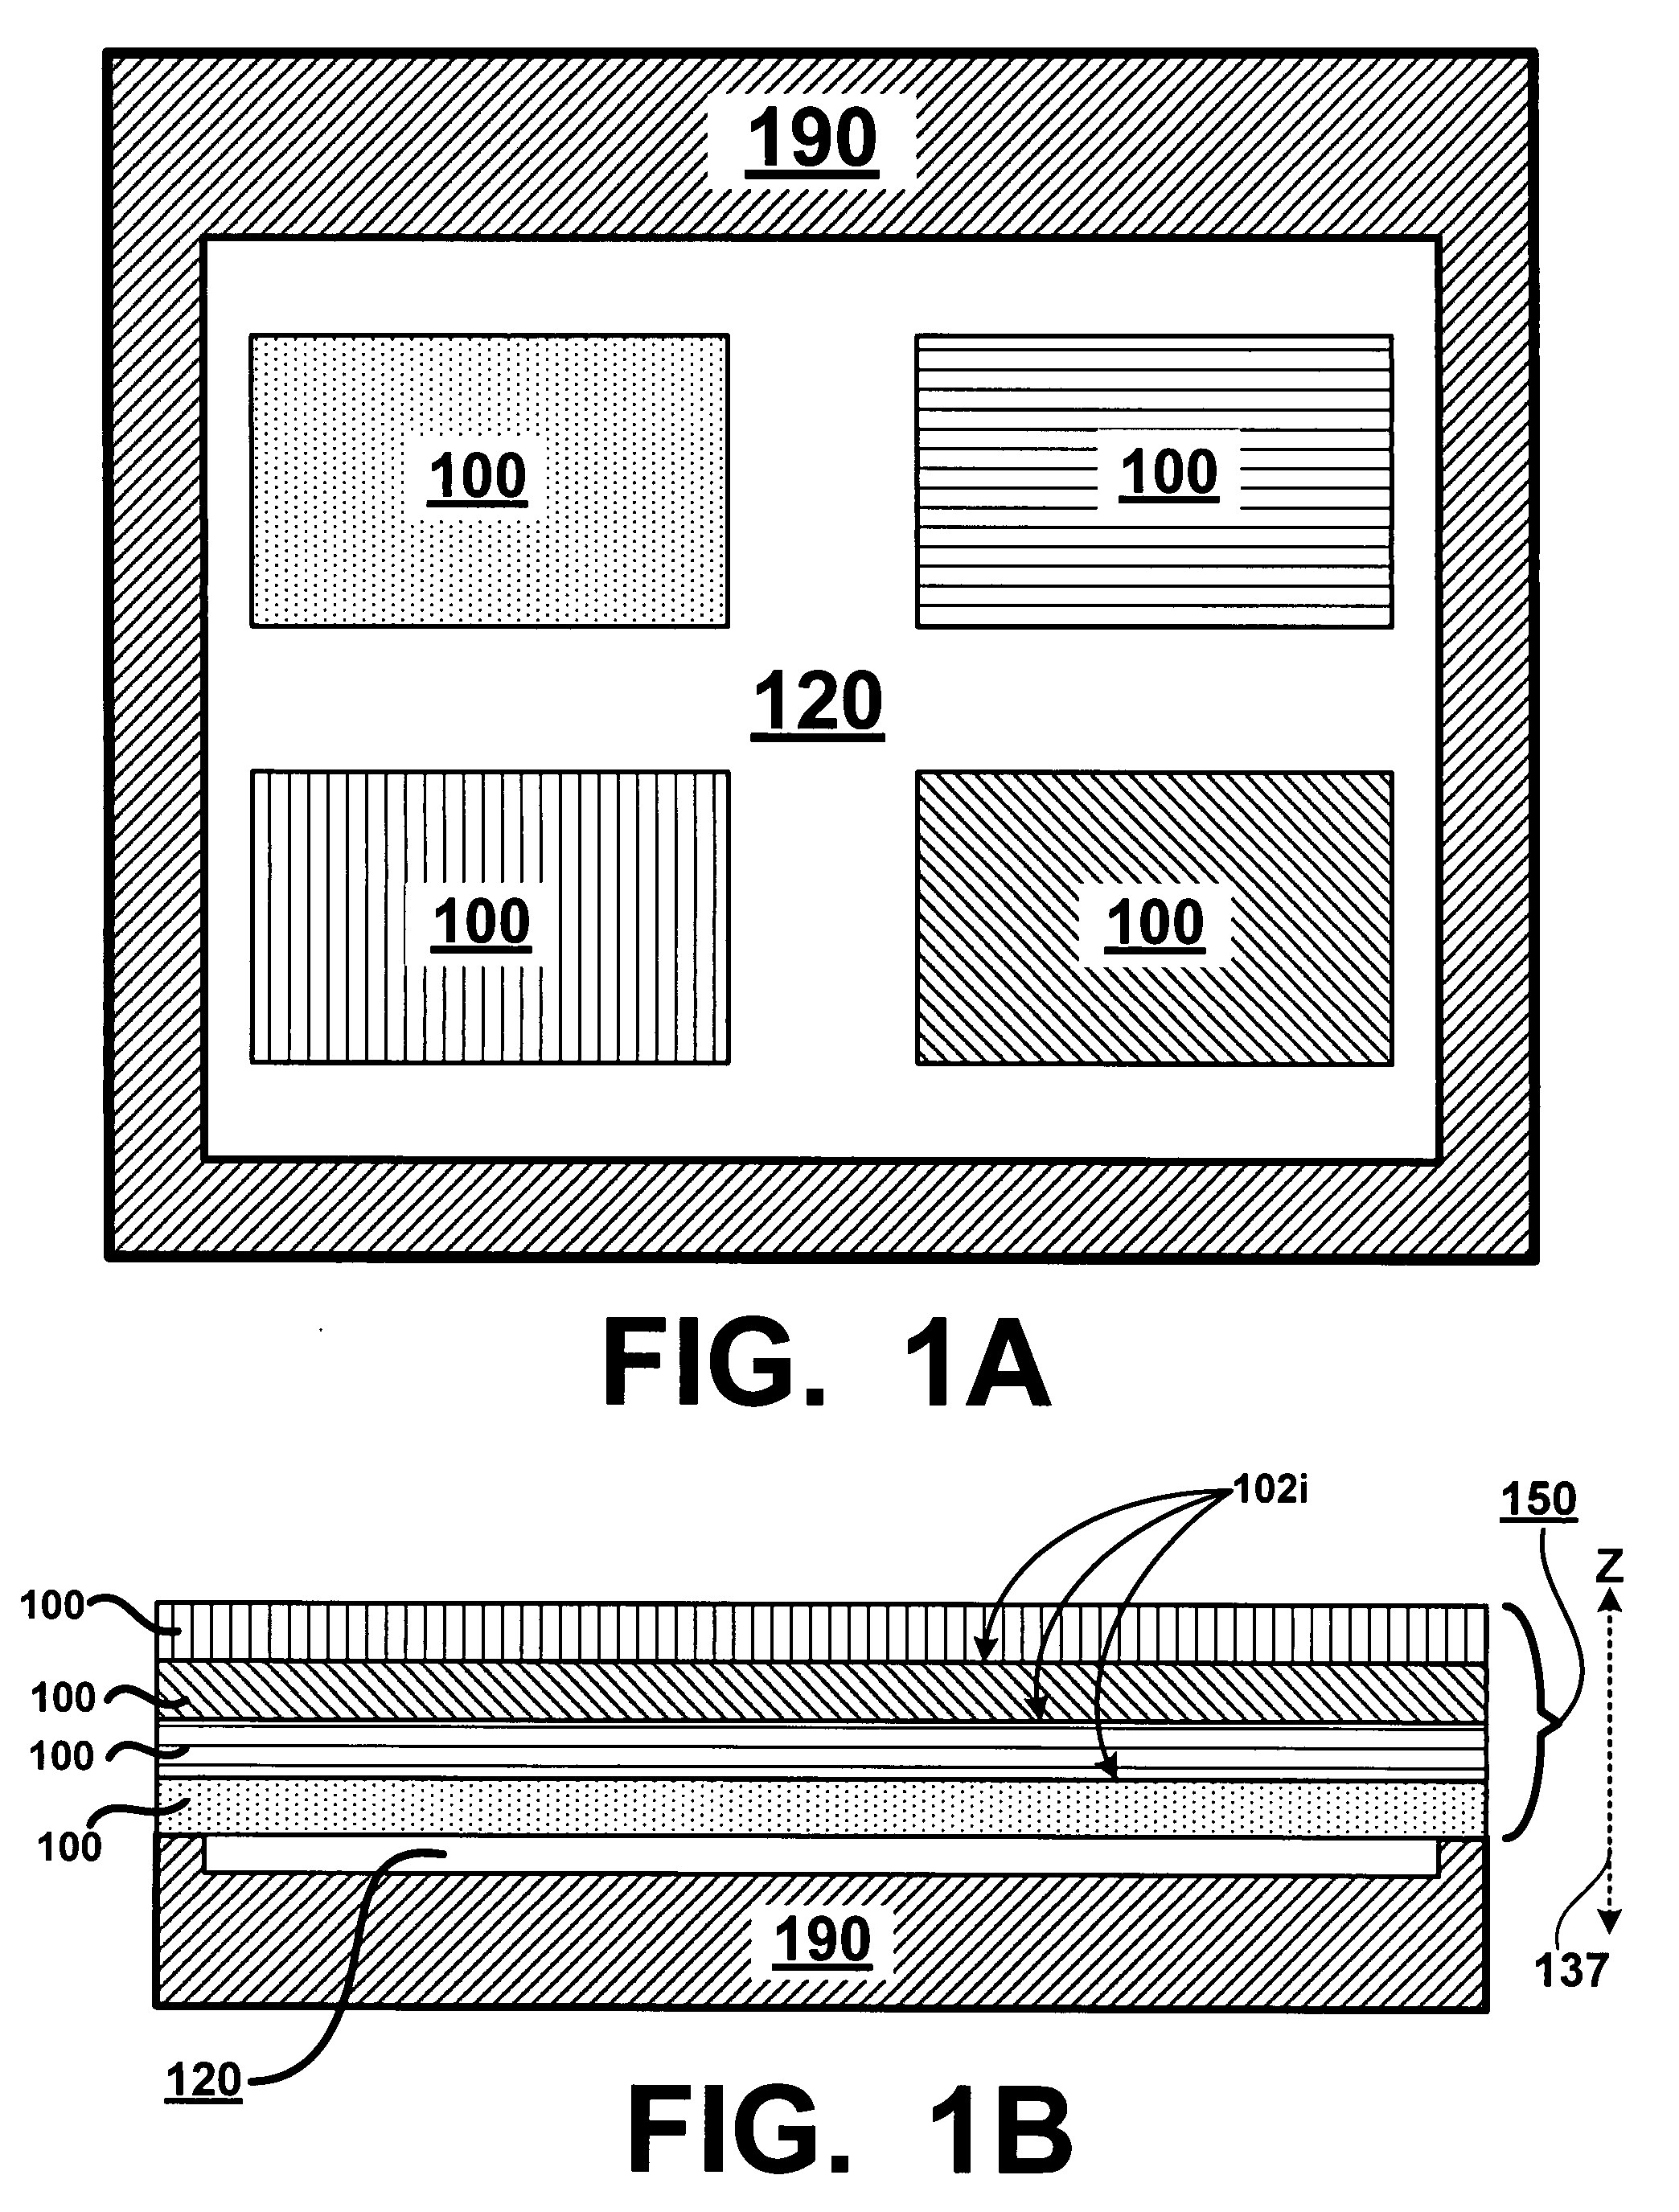 Threshold device for a memory array